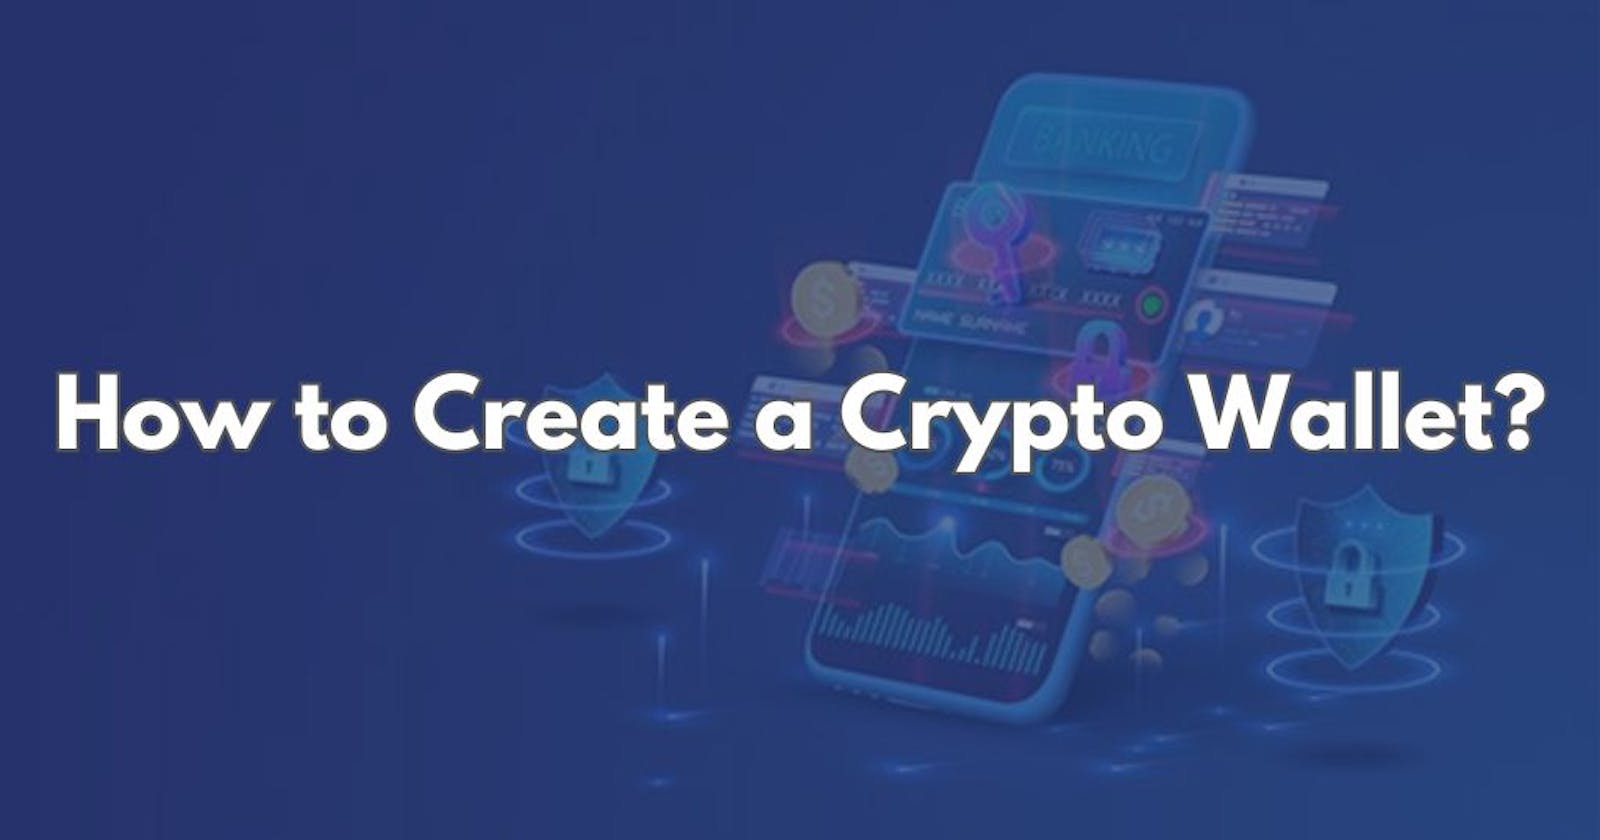 How to Create a Crypto Wallet??